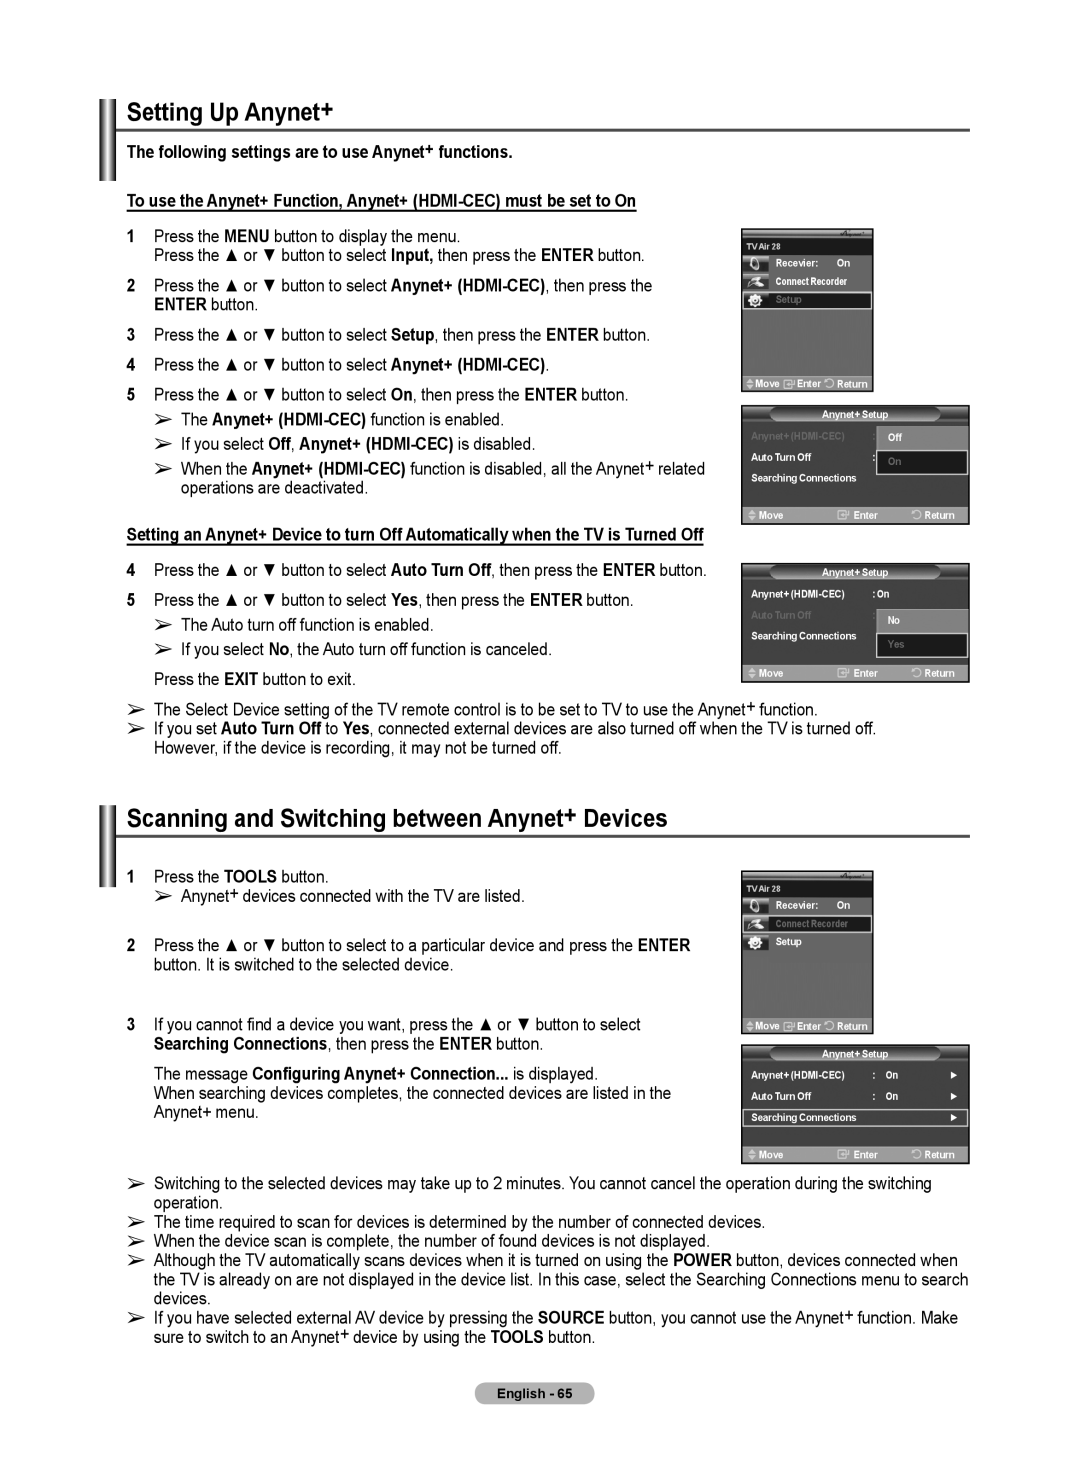 Samsung 460 user manual Setting Up Anynet+, Scanning and Switching between Anynet+ Devices 